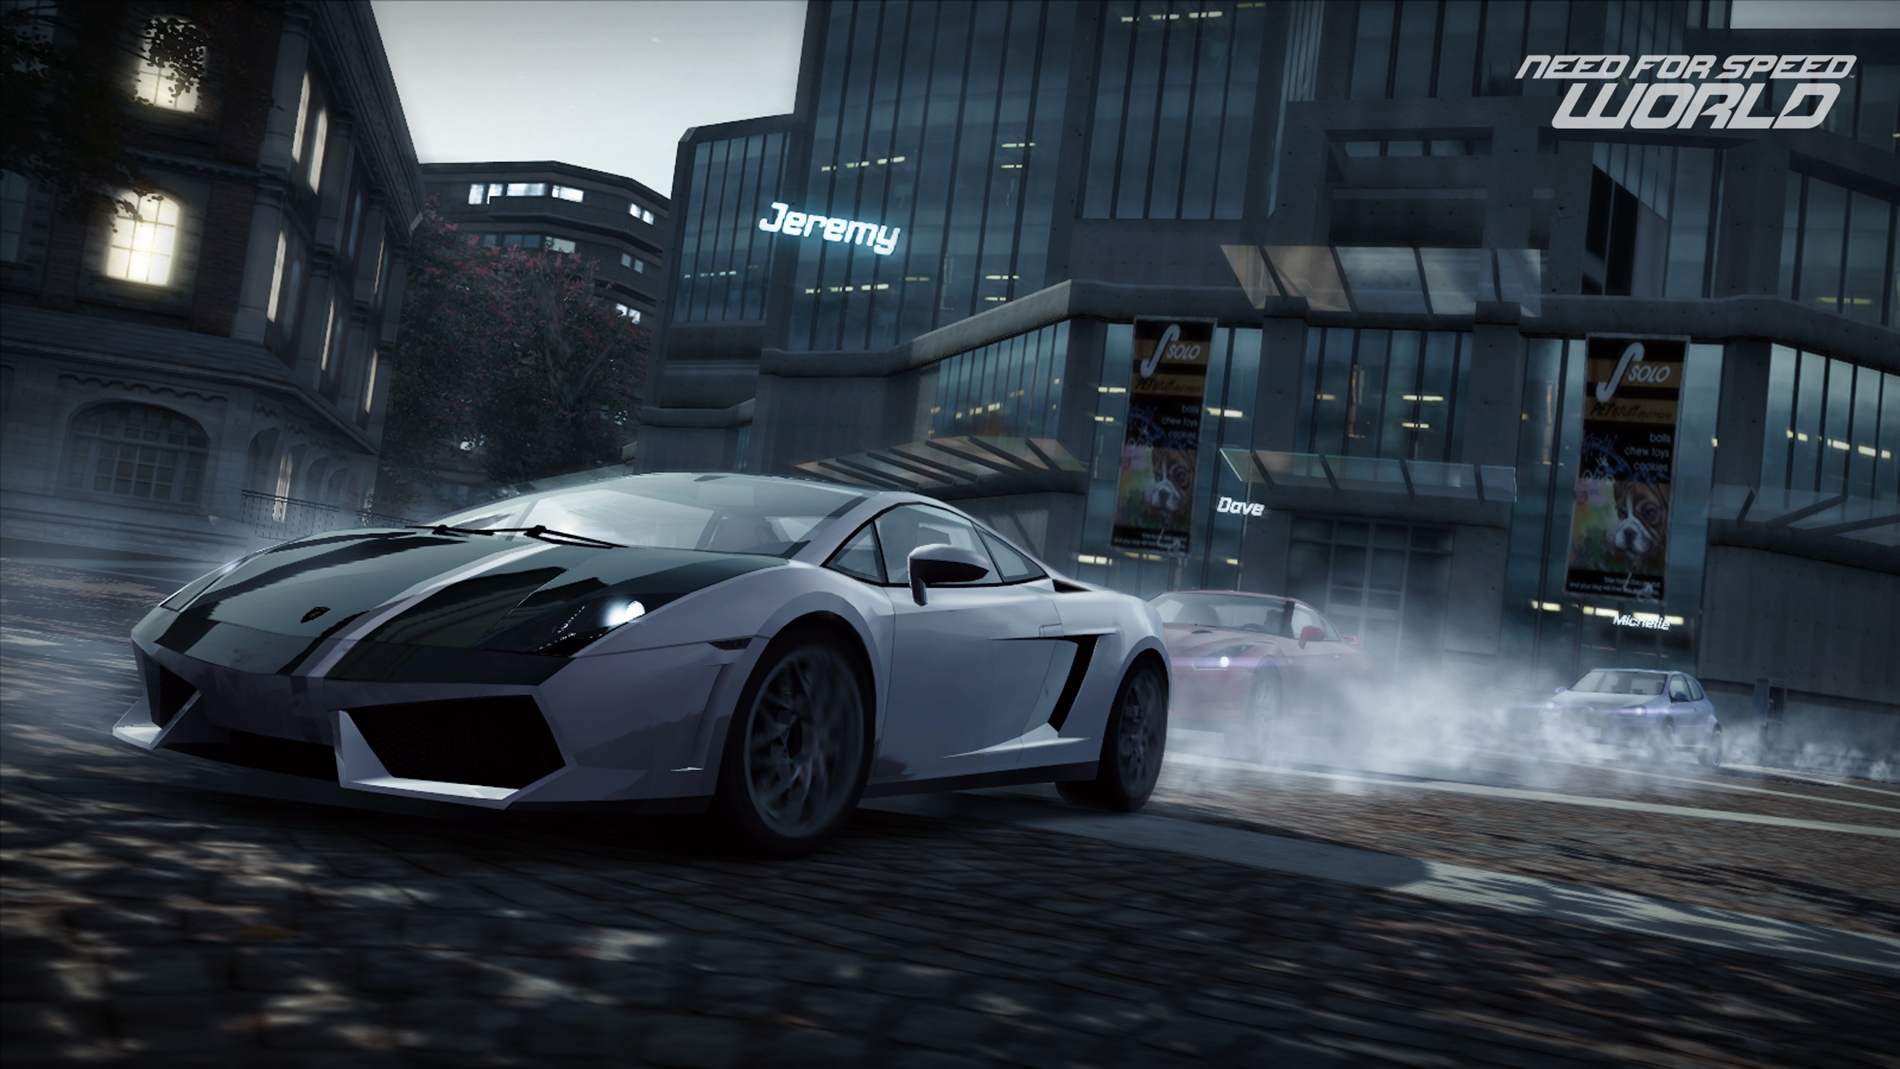 need for speed download mac